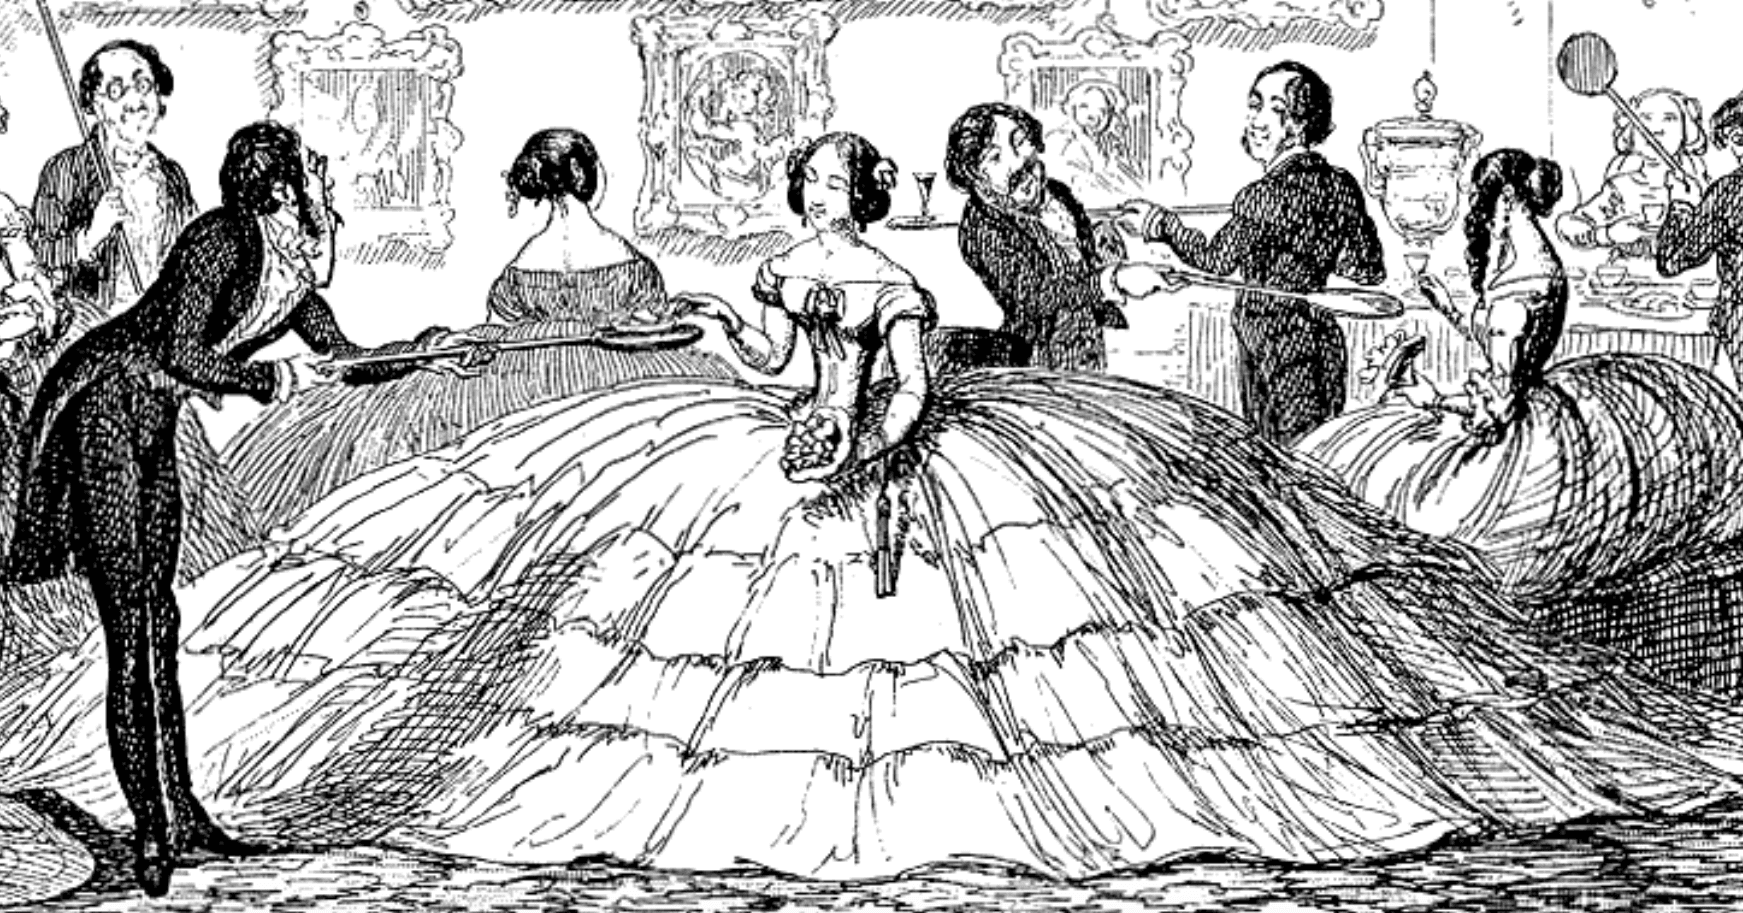 What Was The Deal With Those Giant Victorian Skirts?